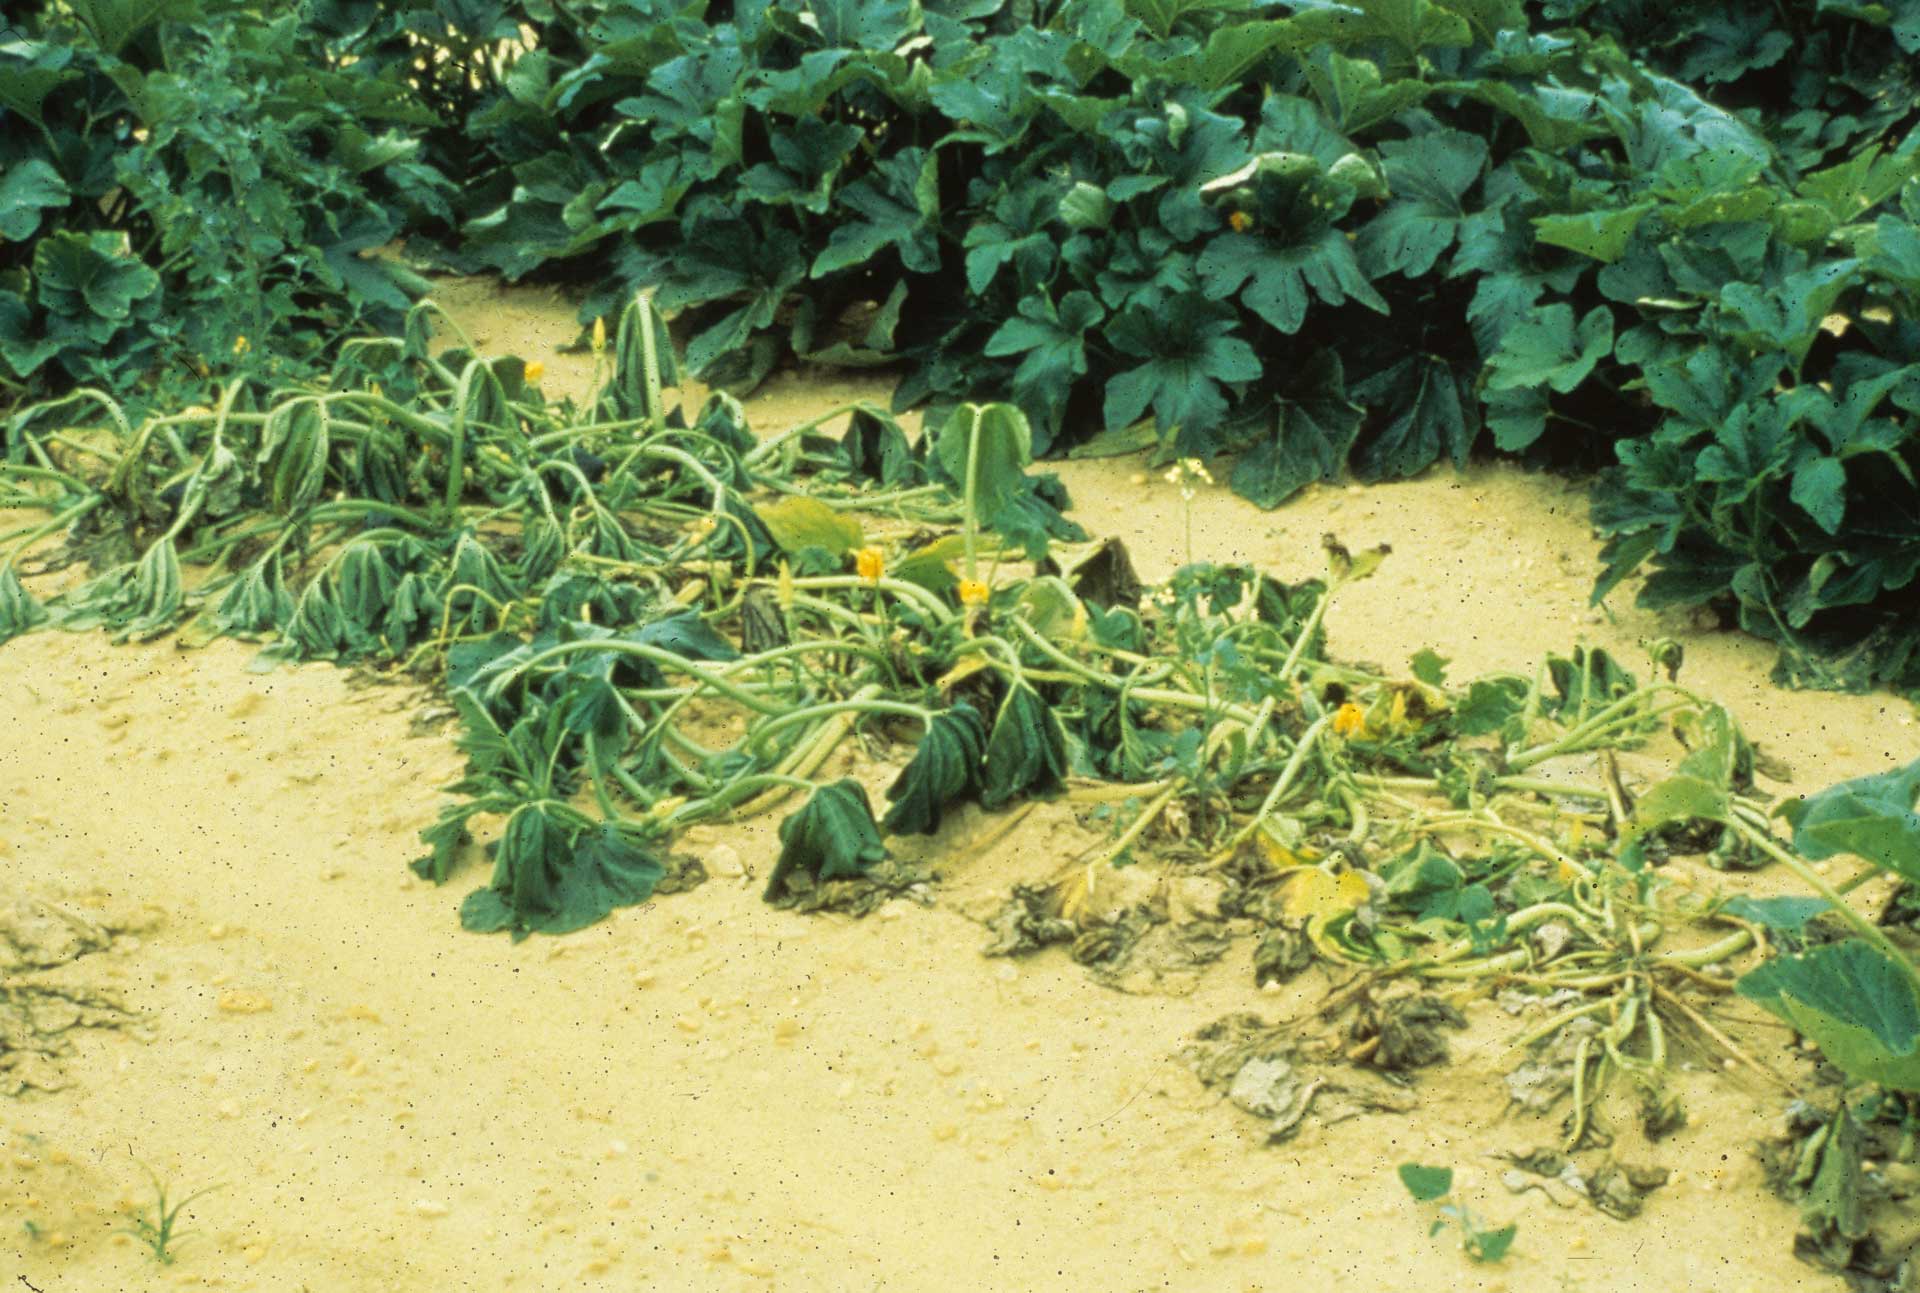 This agronomic image shows phytophthora blight in summer squash.